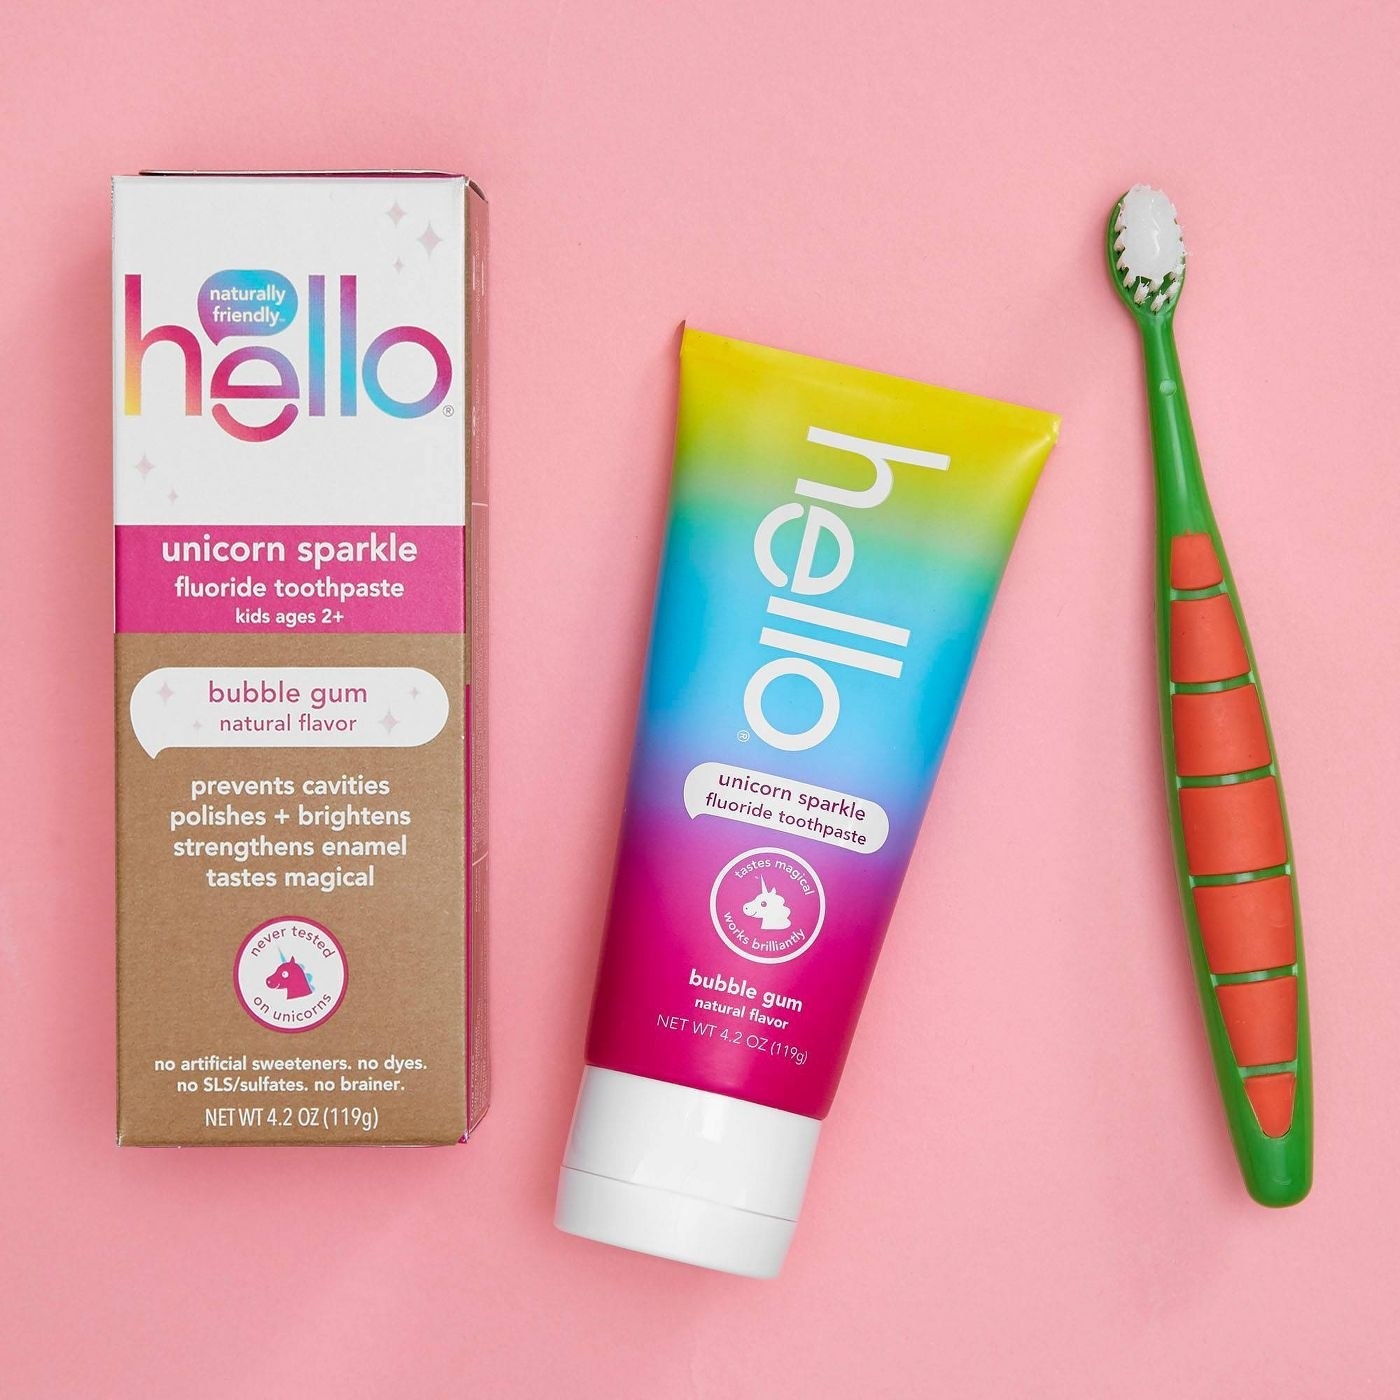 The toothpaste, which comes in a small, rainbow-colored tube